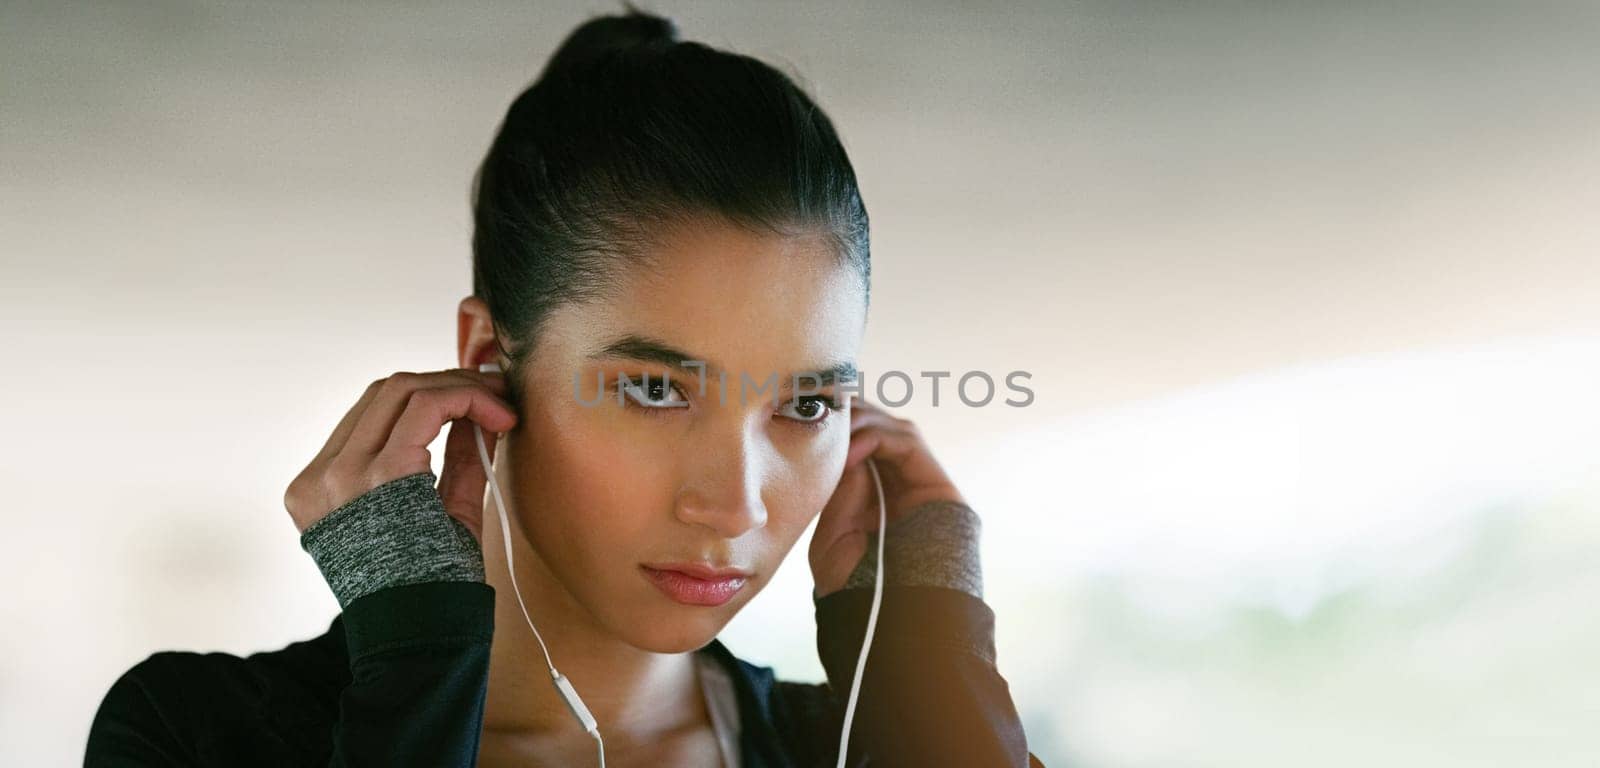 Fitness, focus and woman with earphones for streaming music, listening to podcast or radio station. Serious, sport and female athlete for running, morning workout or cardio exercise on banner.